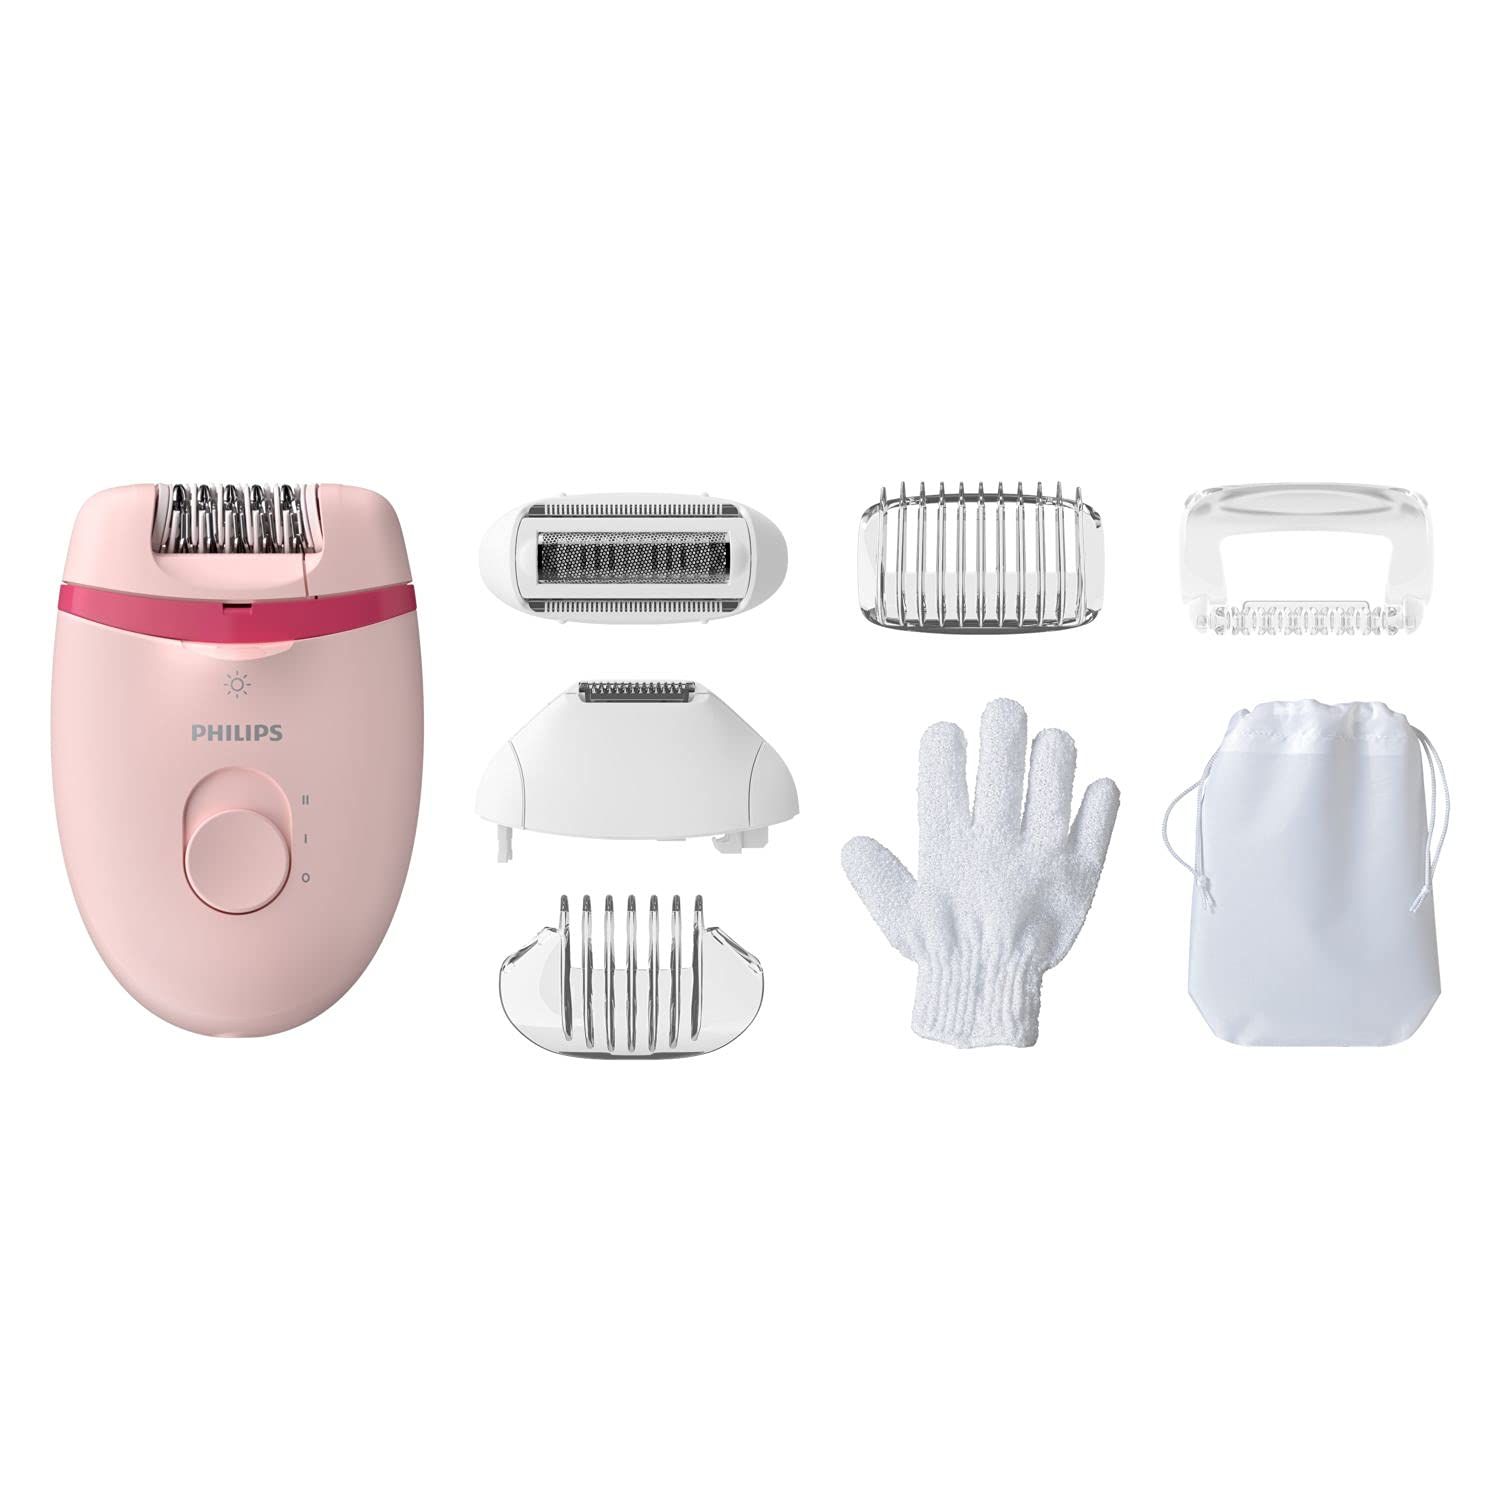 Buy Philips BRE285/00 compact epilator With opti-light For legs, Arms & Underarms - Corded - Purplle